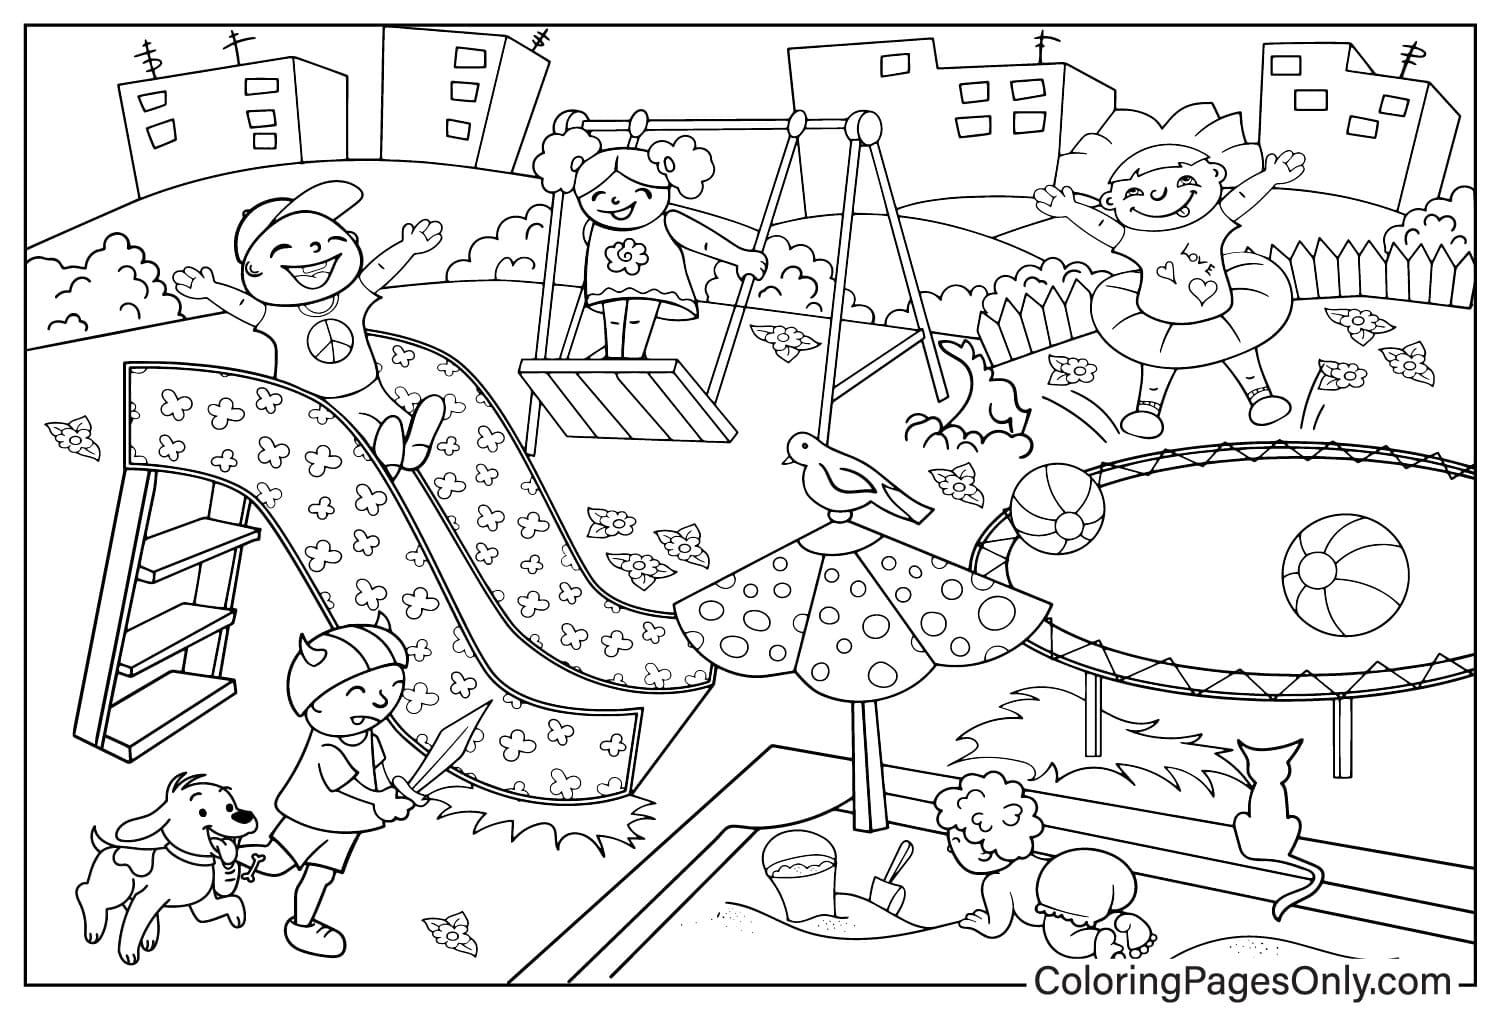 Playground Free Printable Coloring Page from Playground